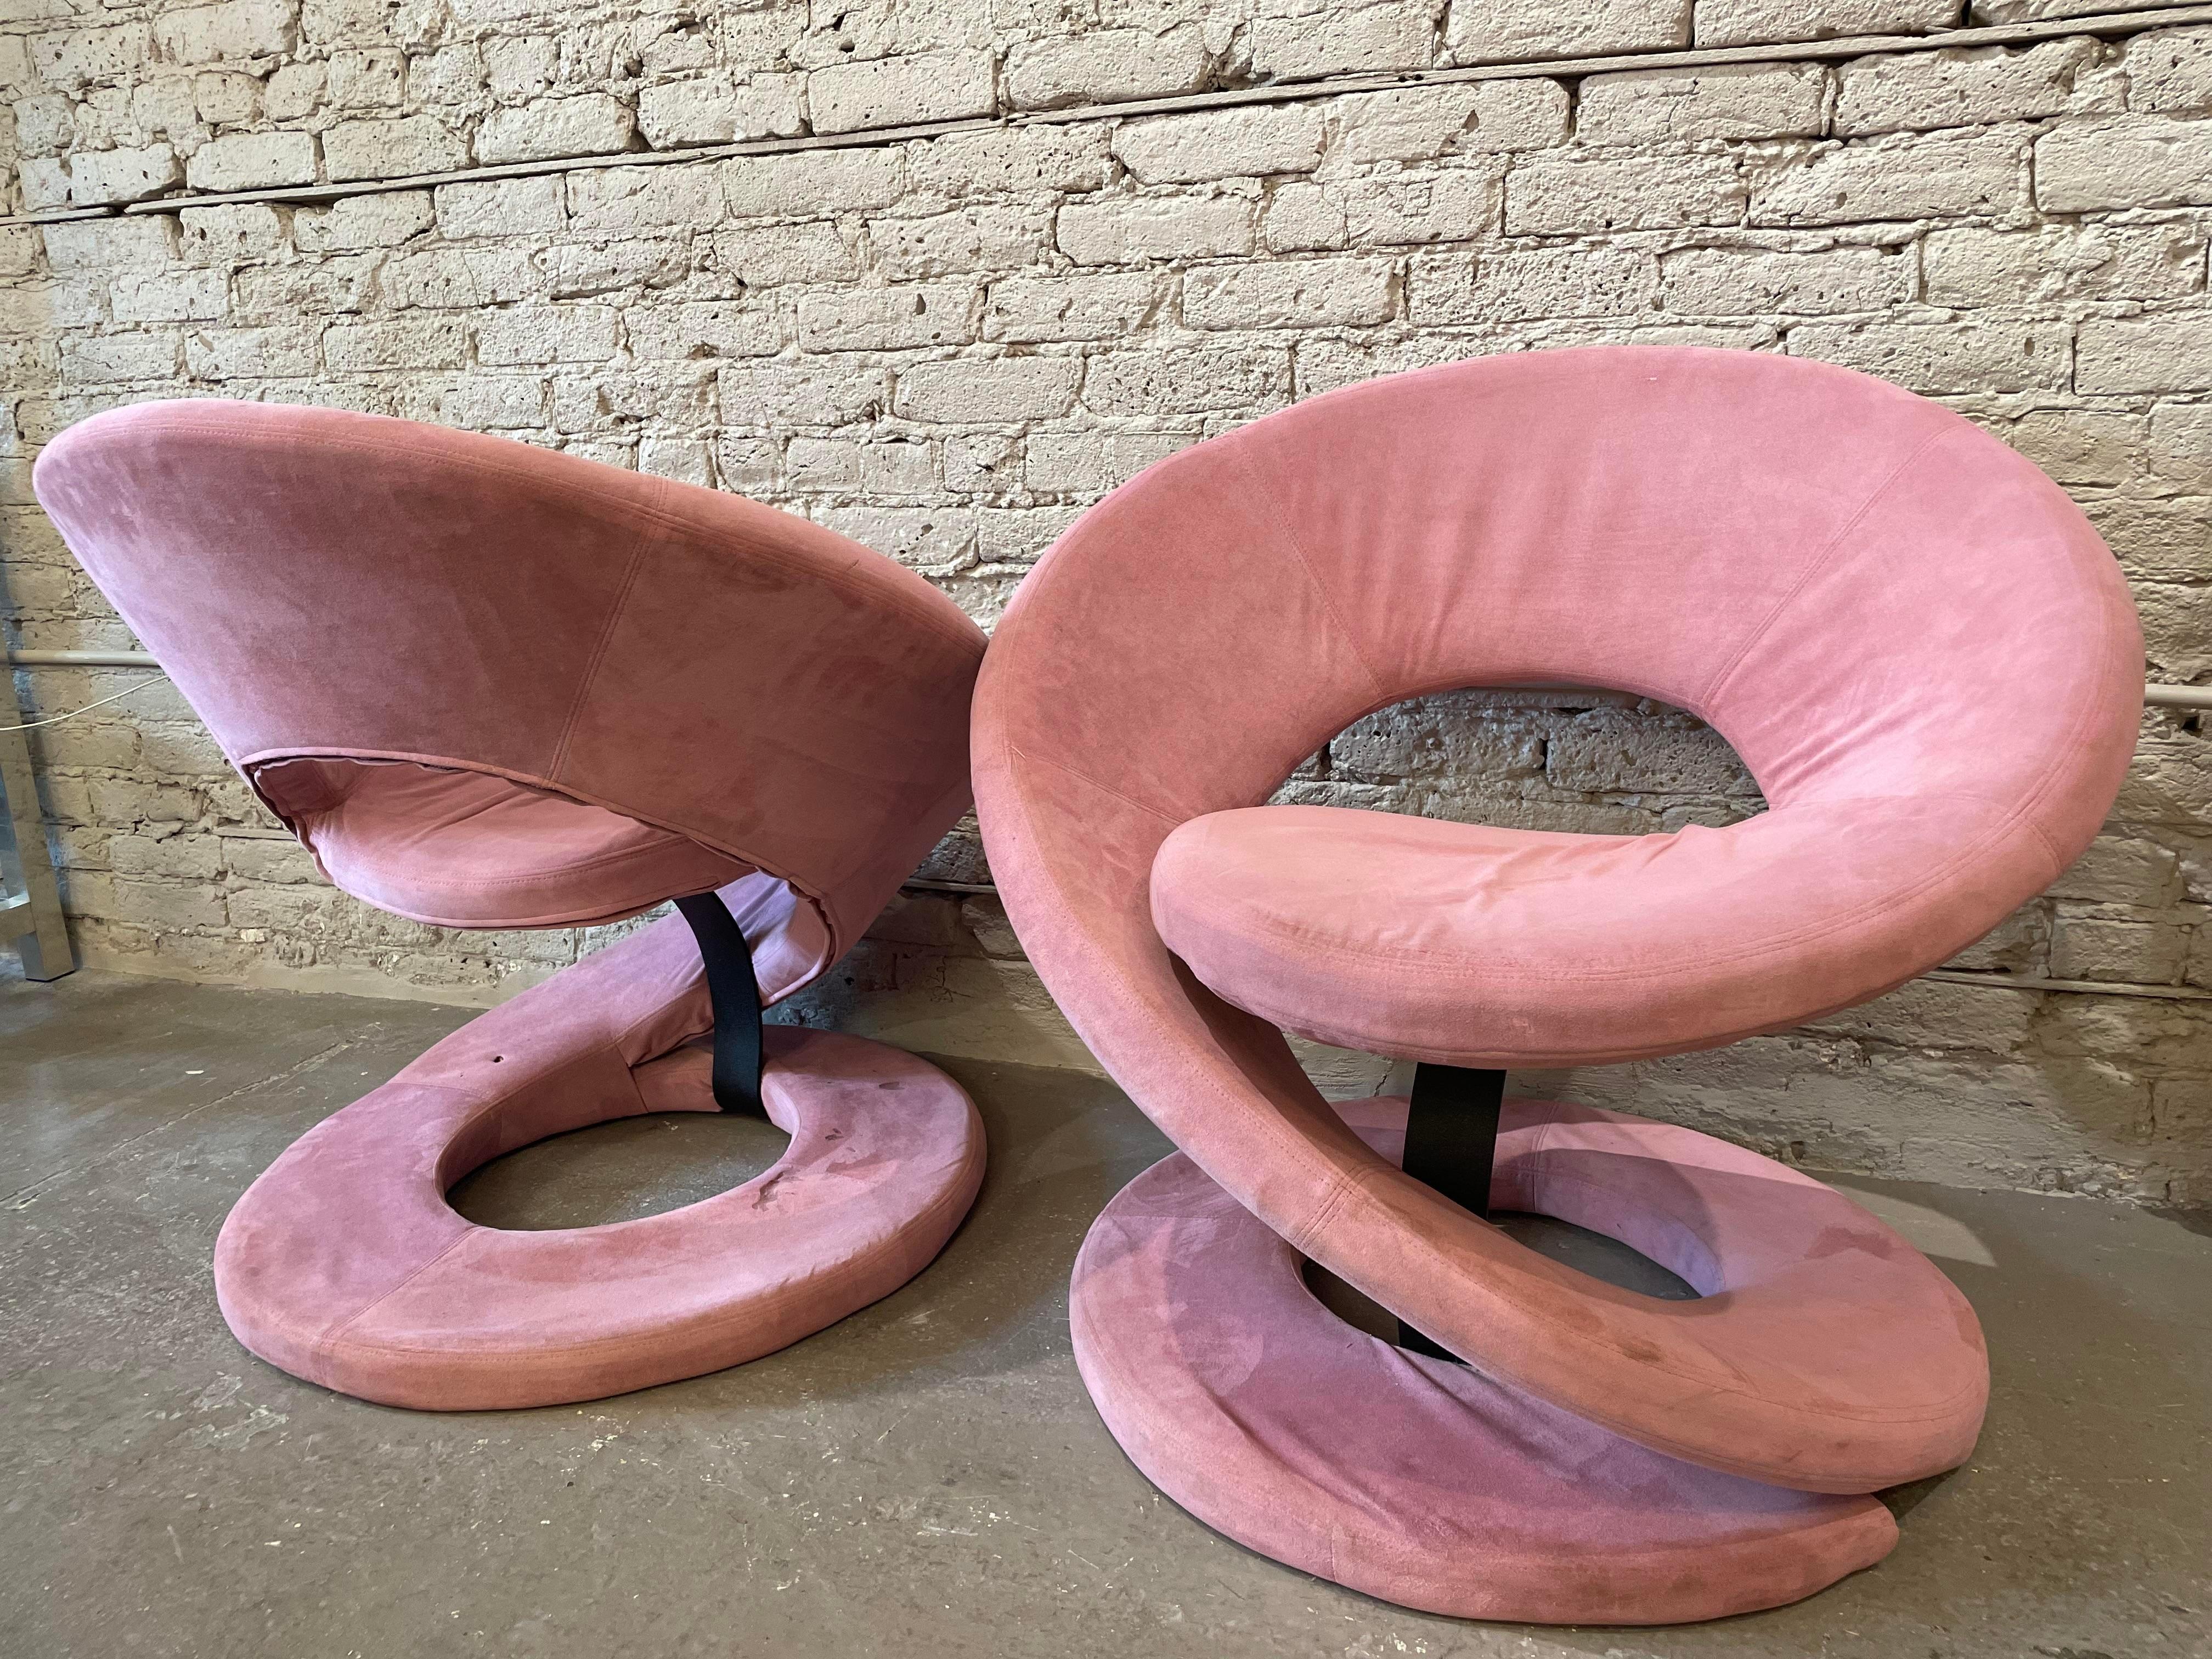 Late 20th Century 1980s Postmodern Corkscrew Chairs Attributed to Quebec 69 Jaymar - a Pair For Sale